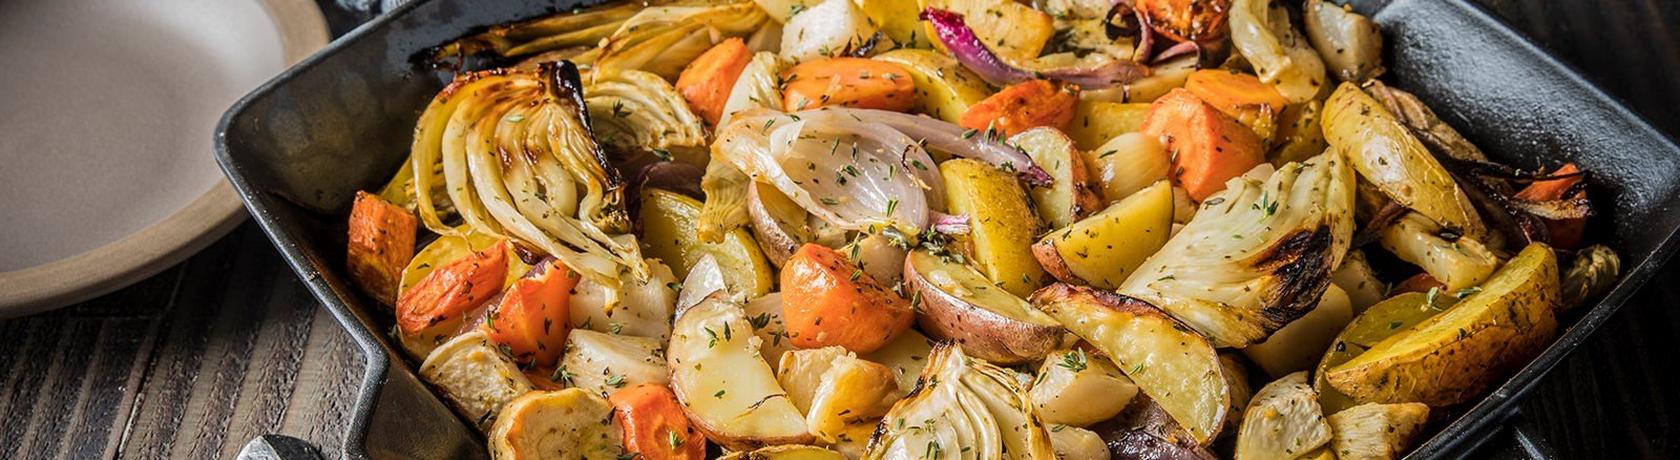 Sherry Roasted Root Vegetables